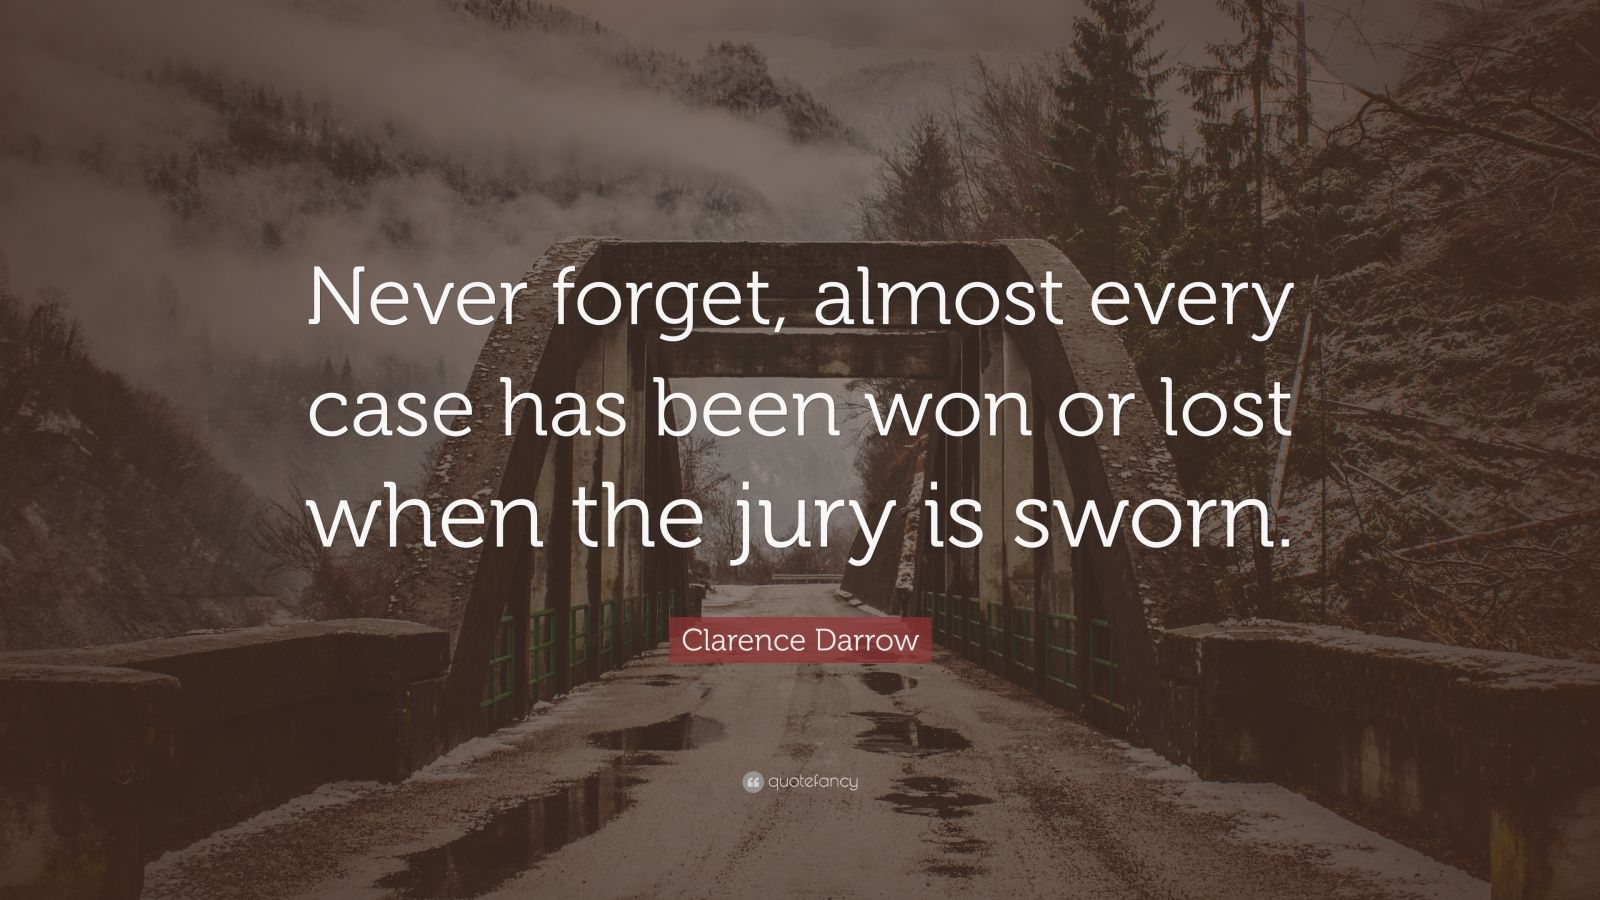 Clarence Darrow Quote: “Never forget, almost every case has been won or ...